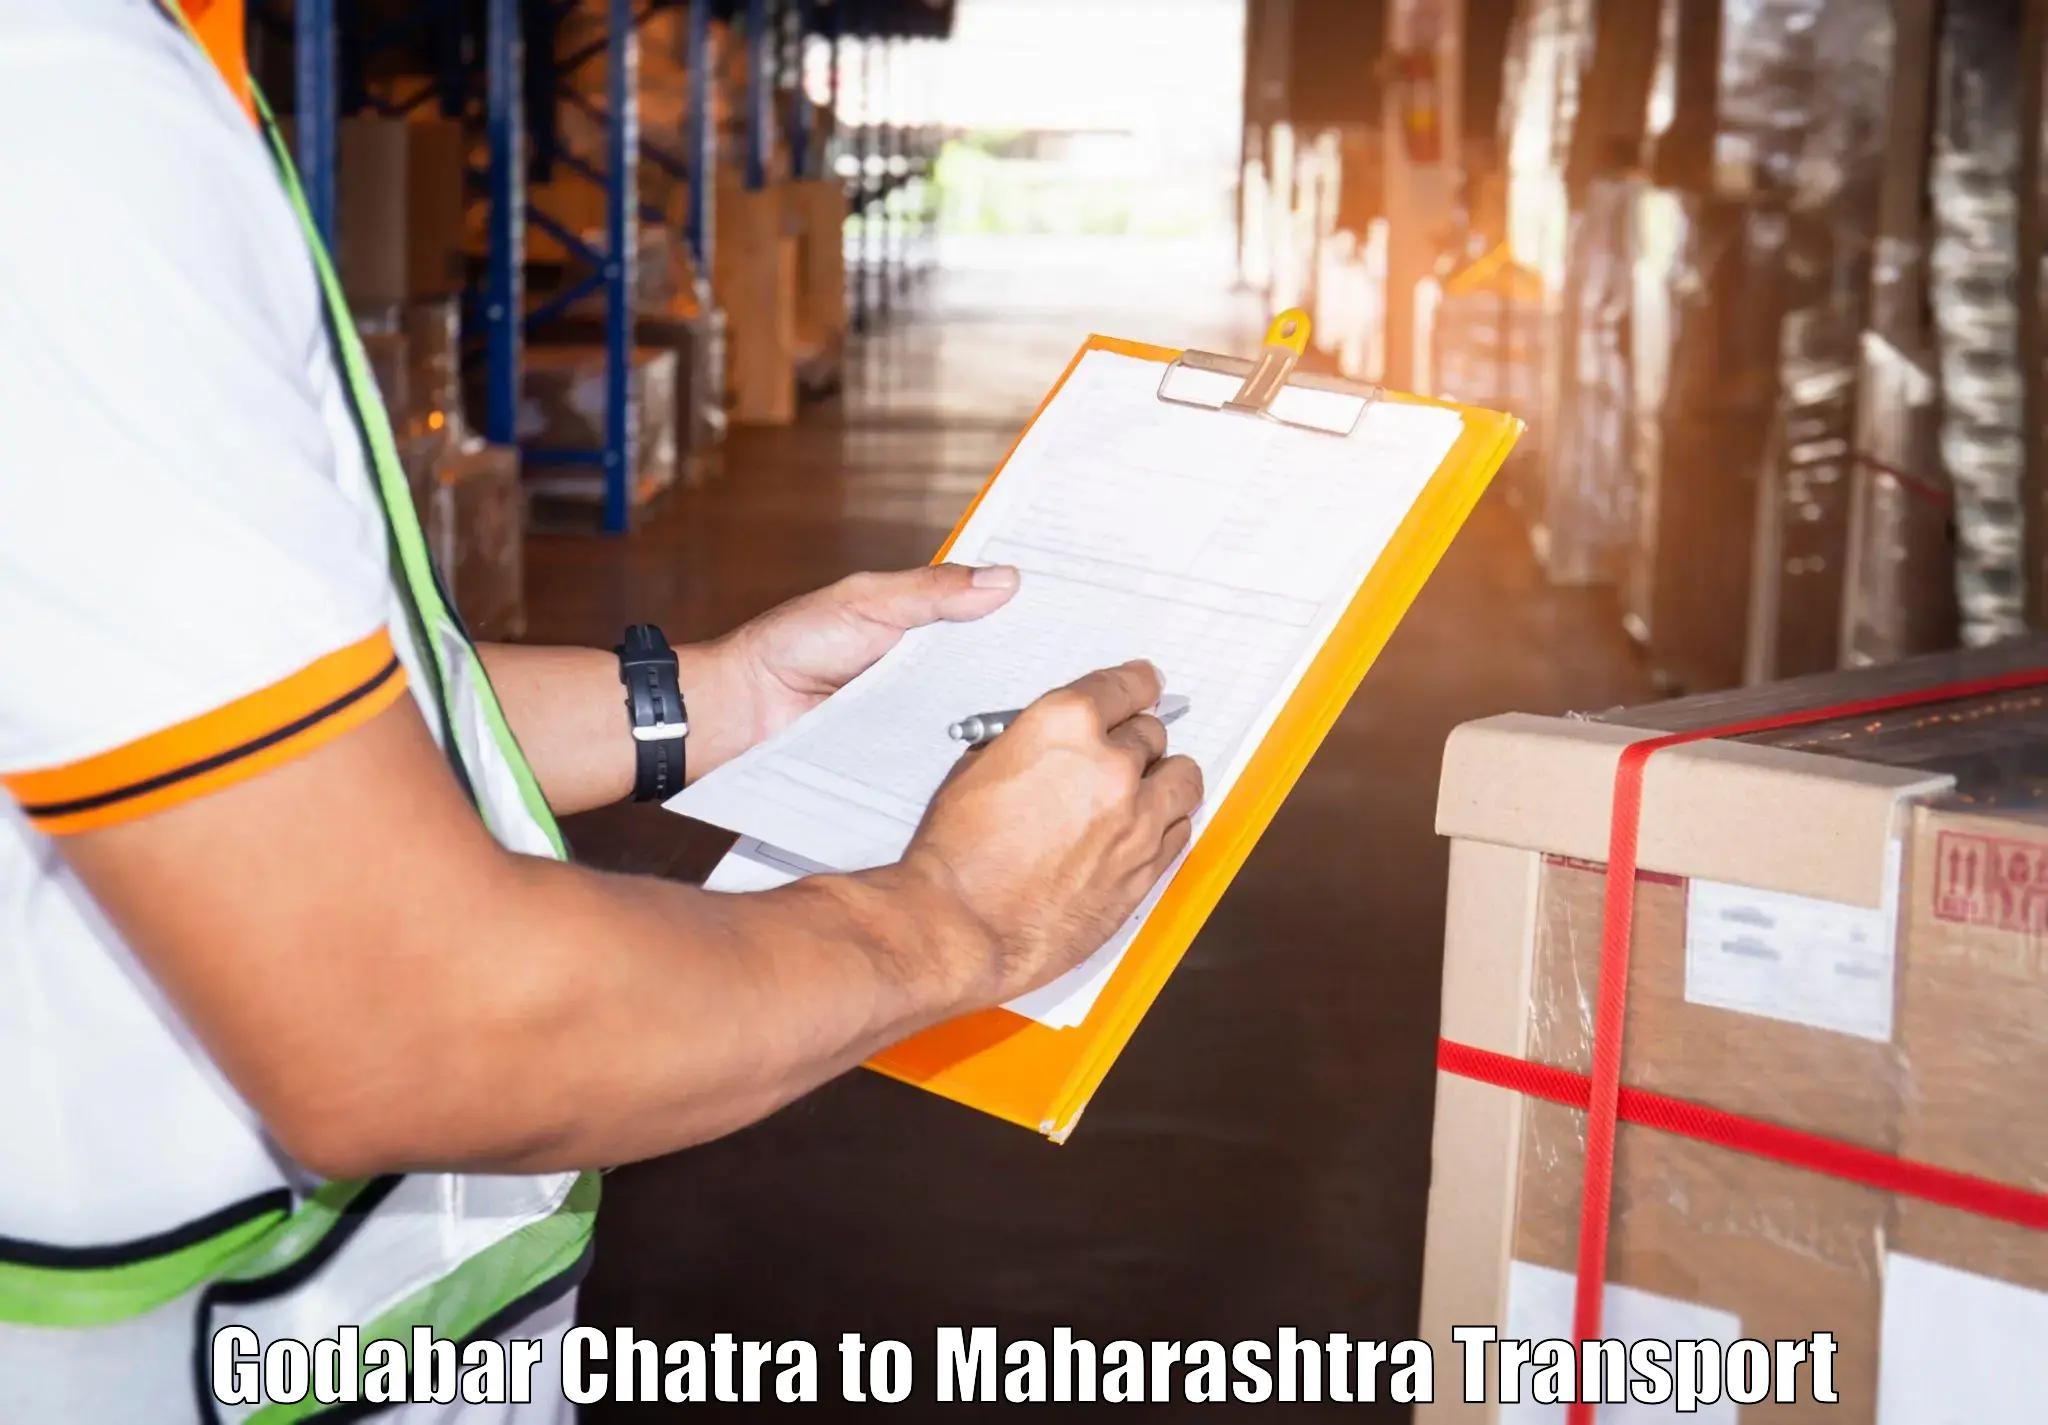 Interstate transport services Godabar Chatra to Supe